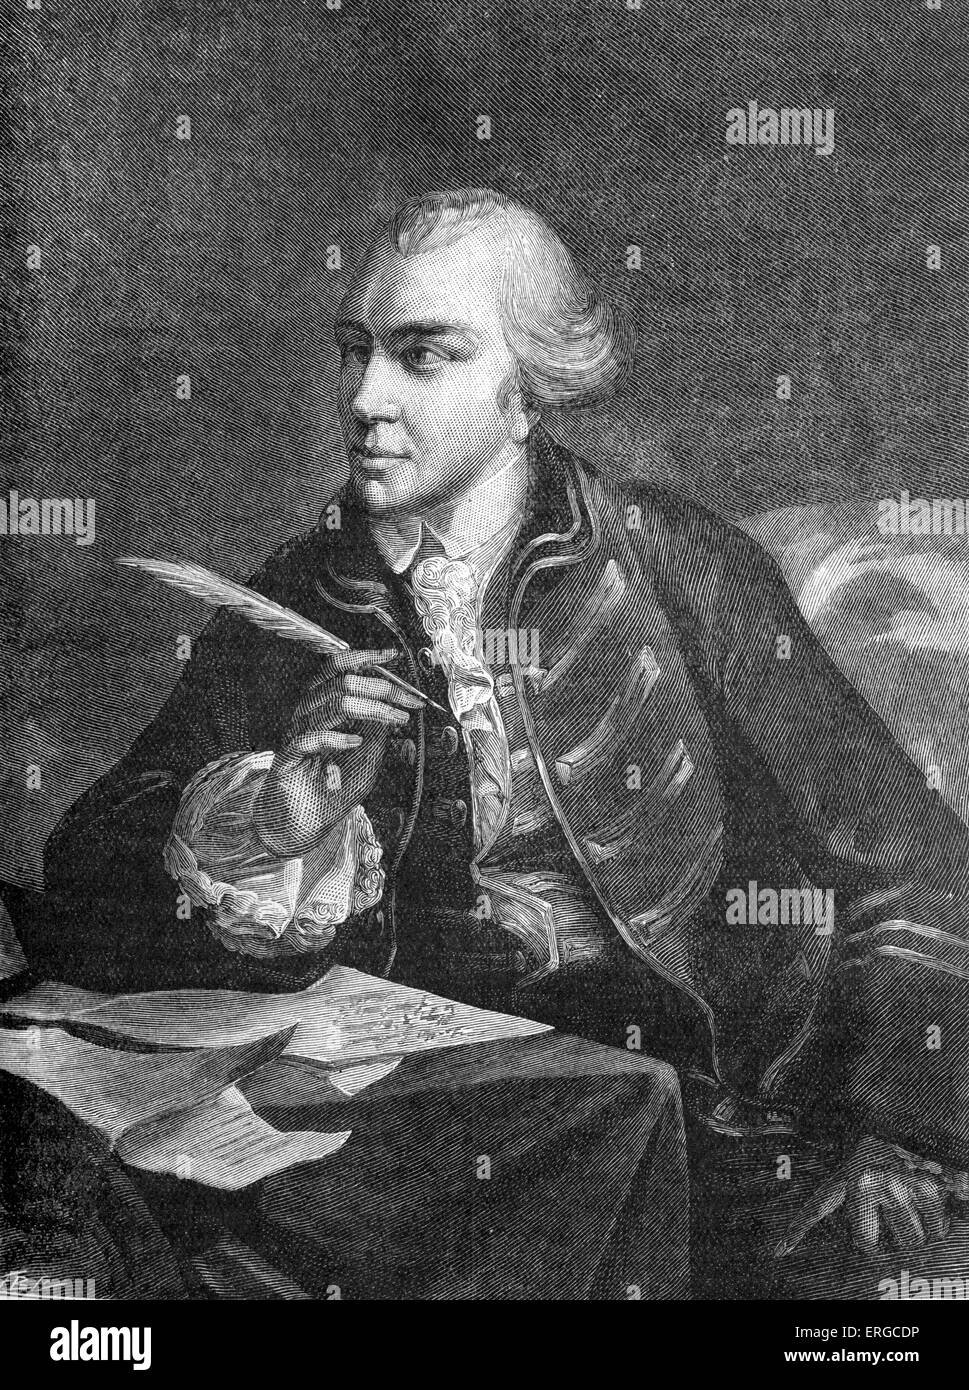 John Wilkes - portrait. English politician, journalist and radical. Known for introducing reform in British Parliament, his Stock Photo